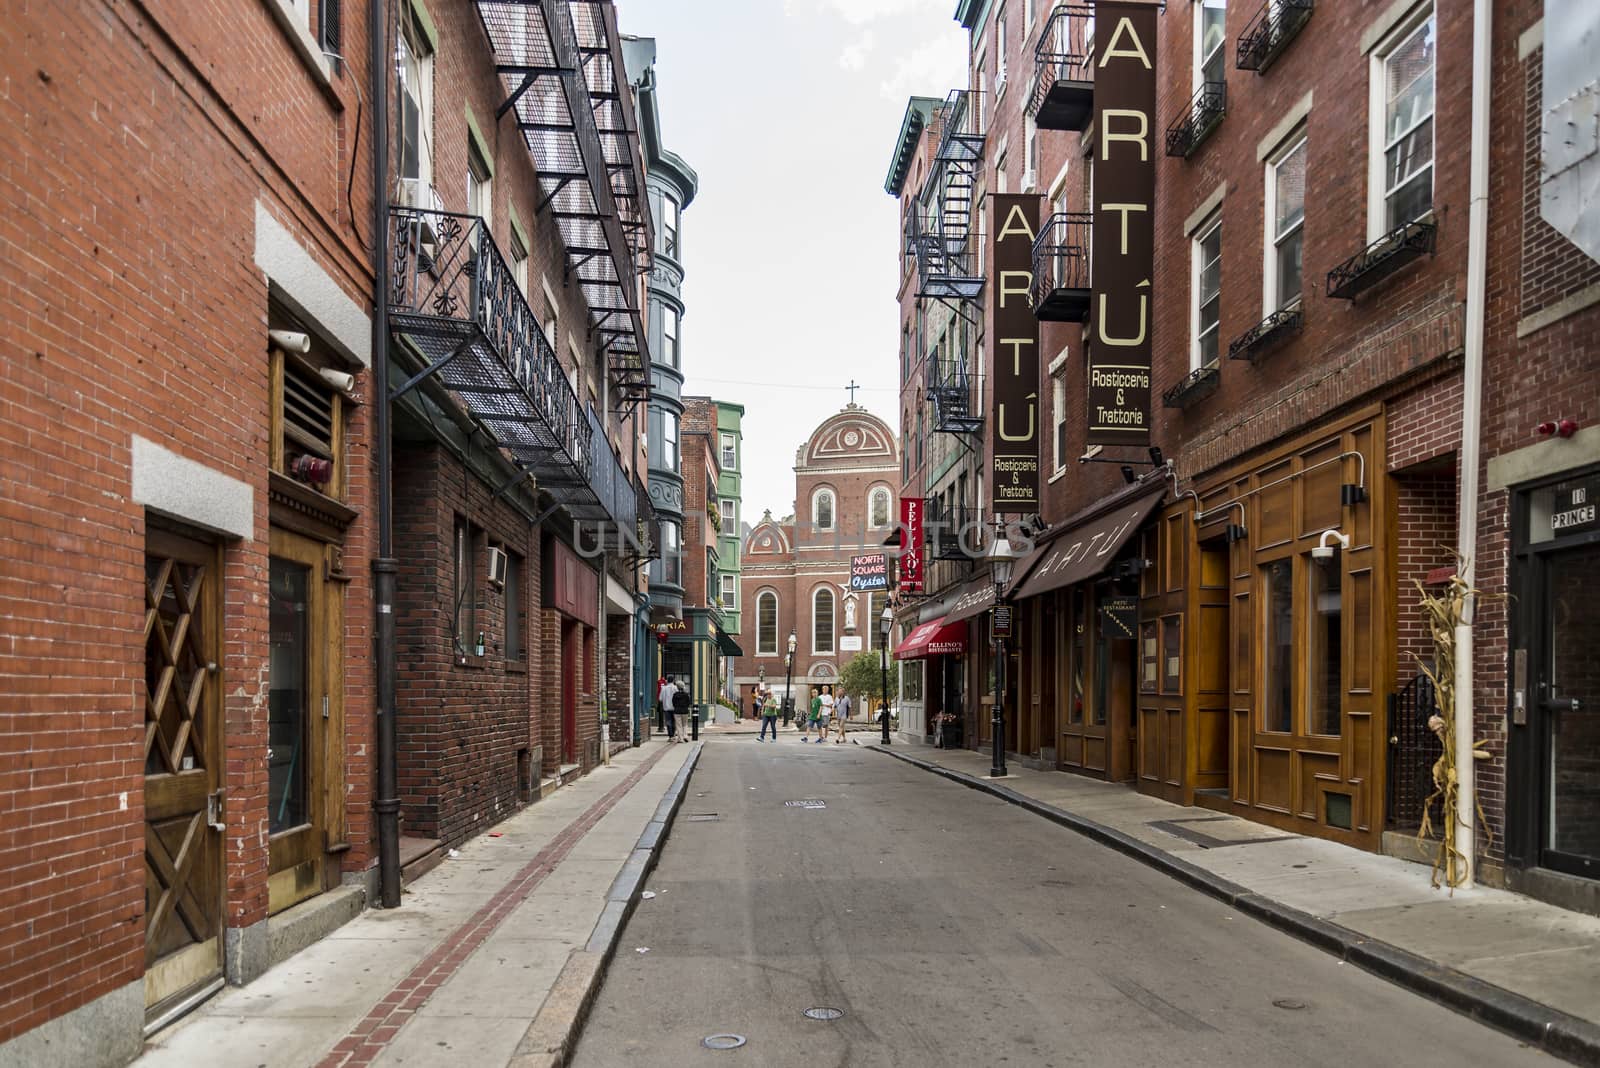 Narrow street in the North End of Boston, Massachusetts. by edella